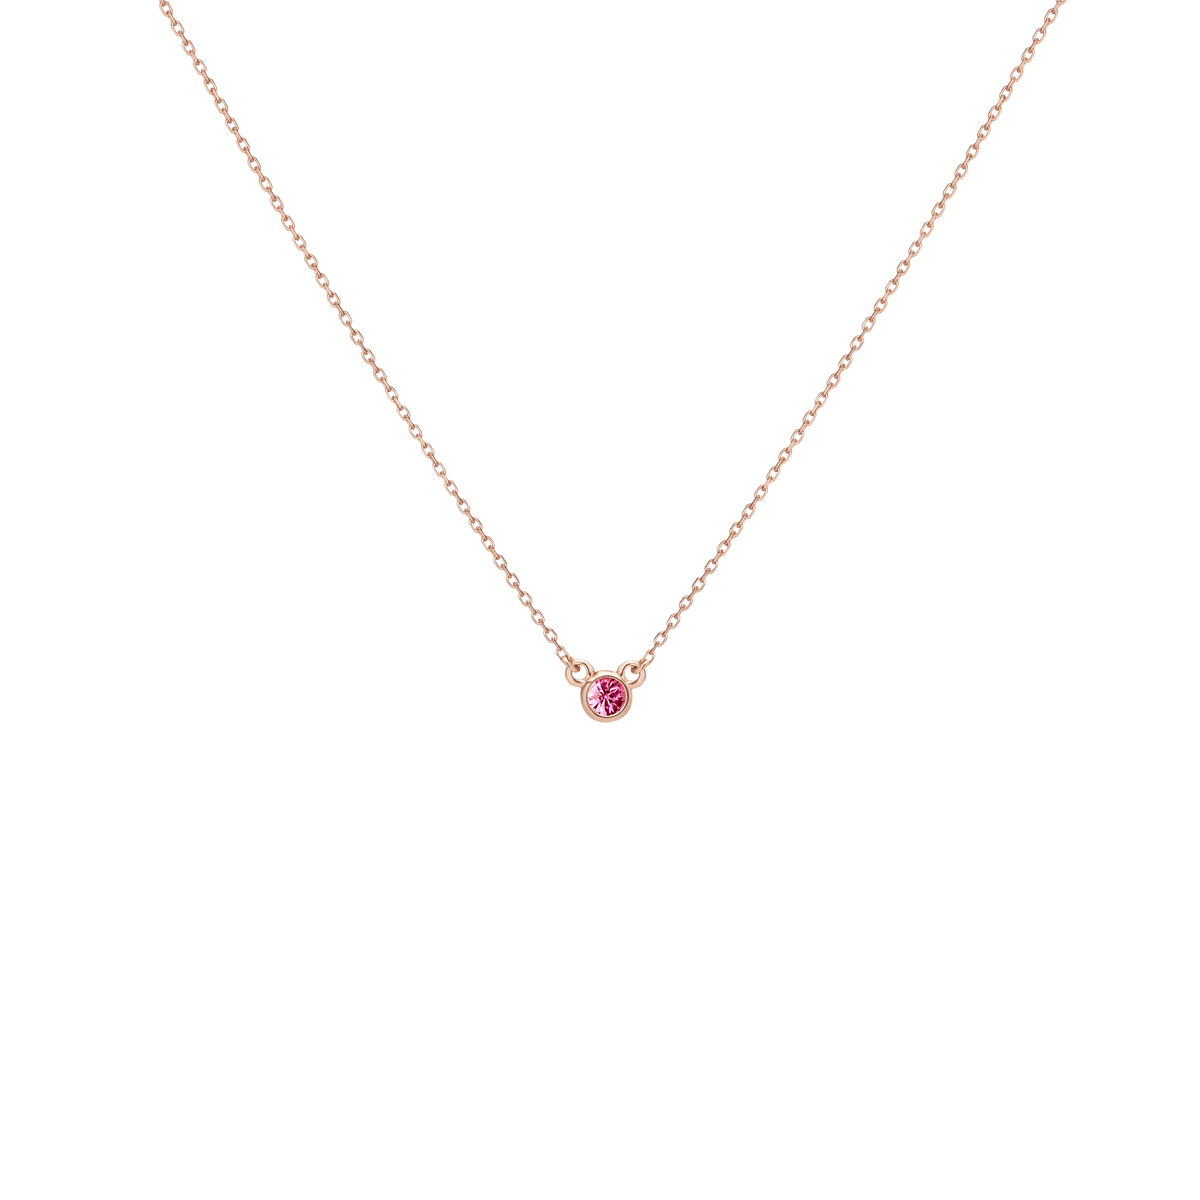 Birthstone Necklace in Yellow, Rose or White Gold